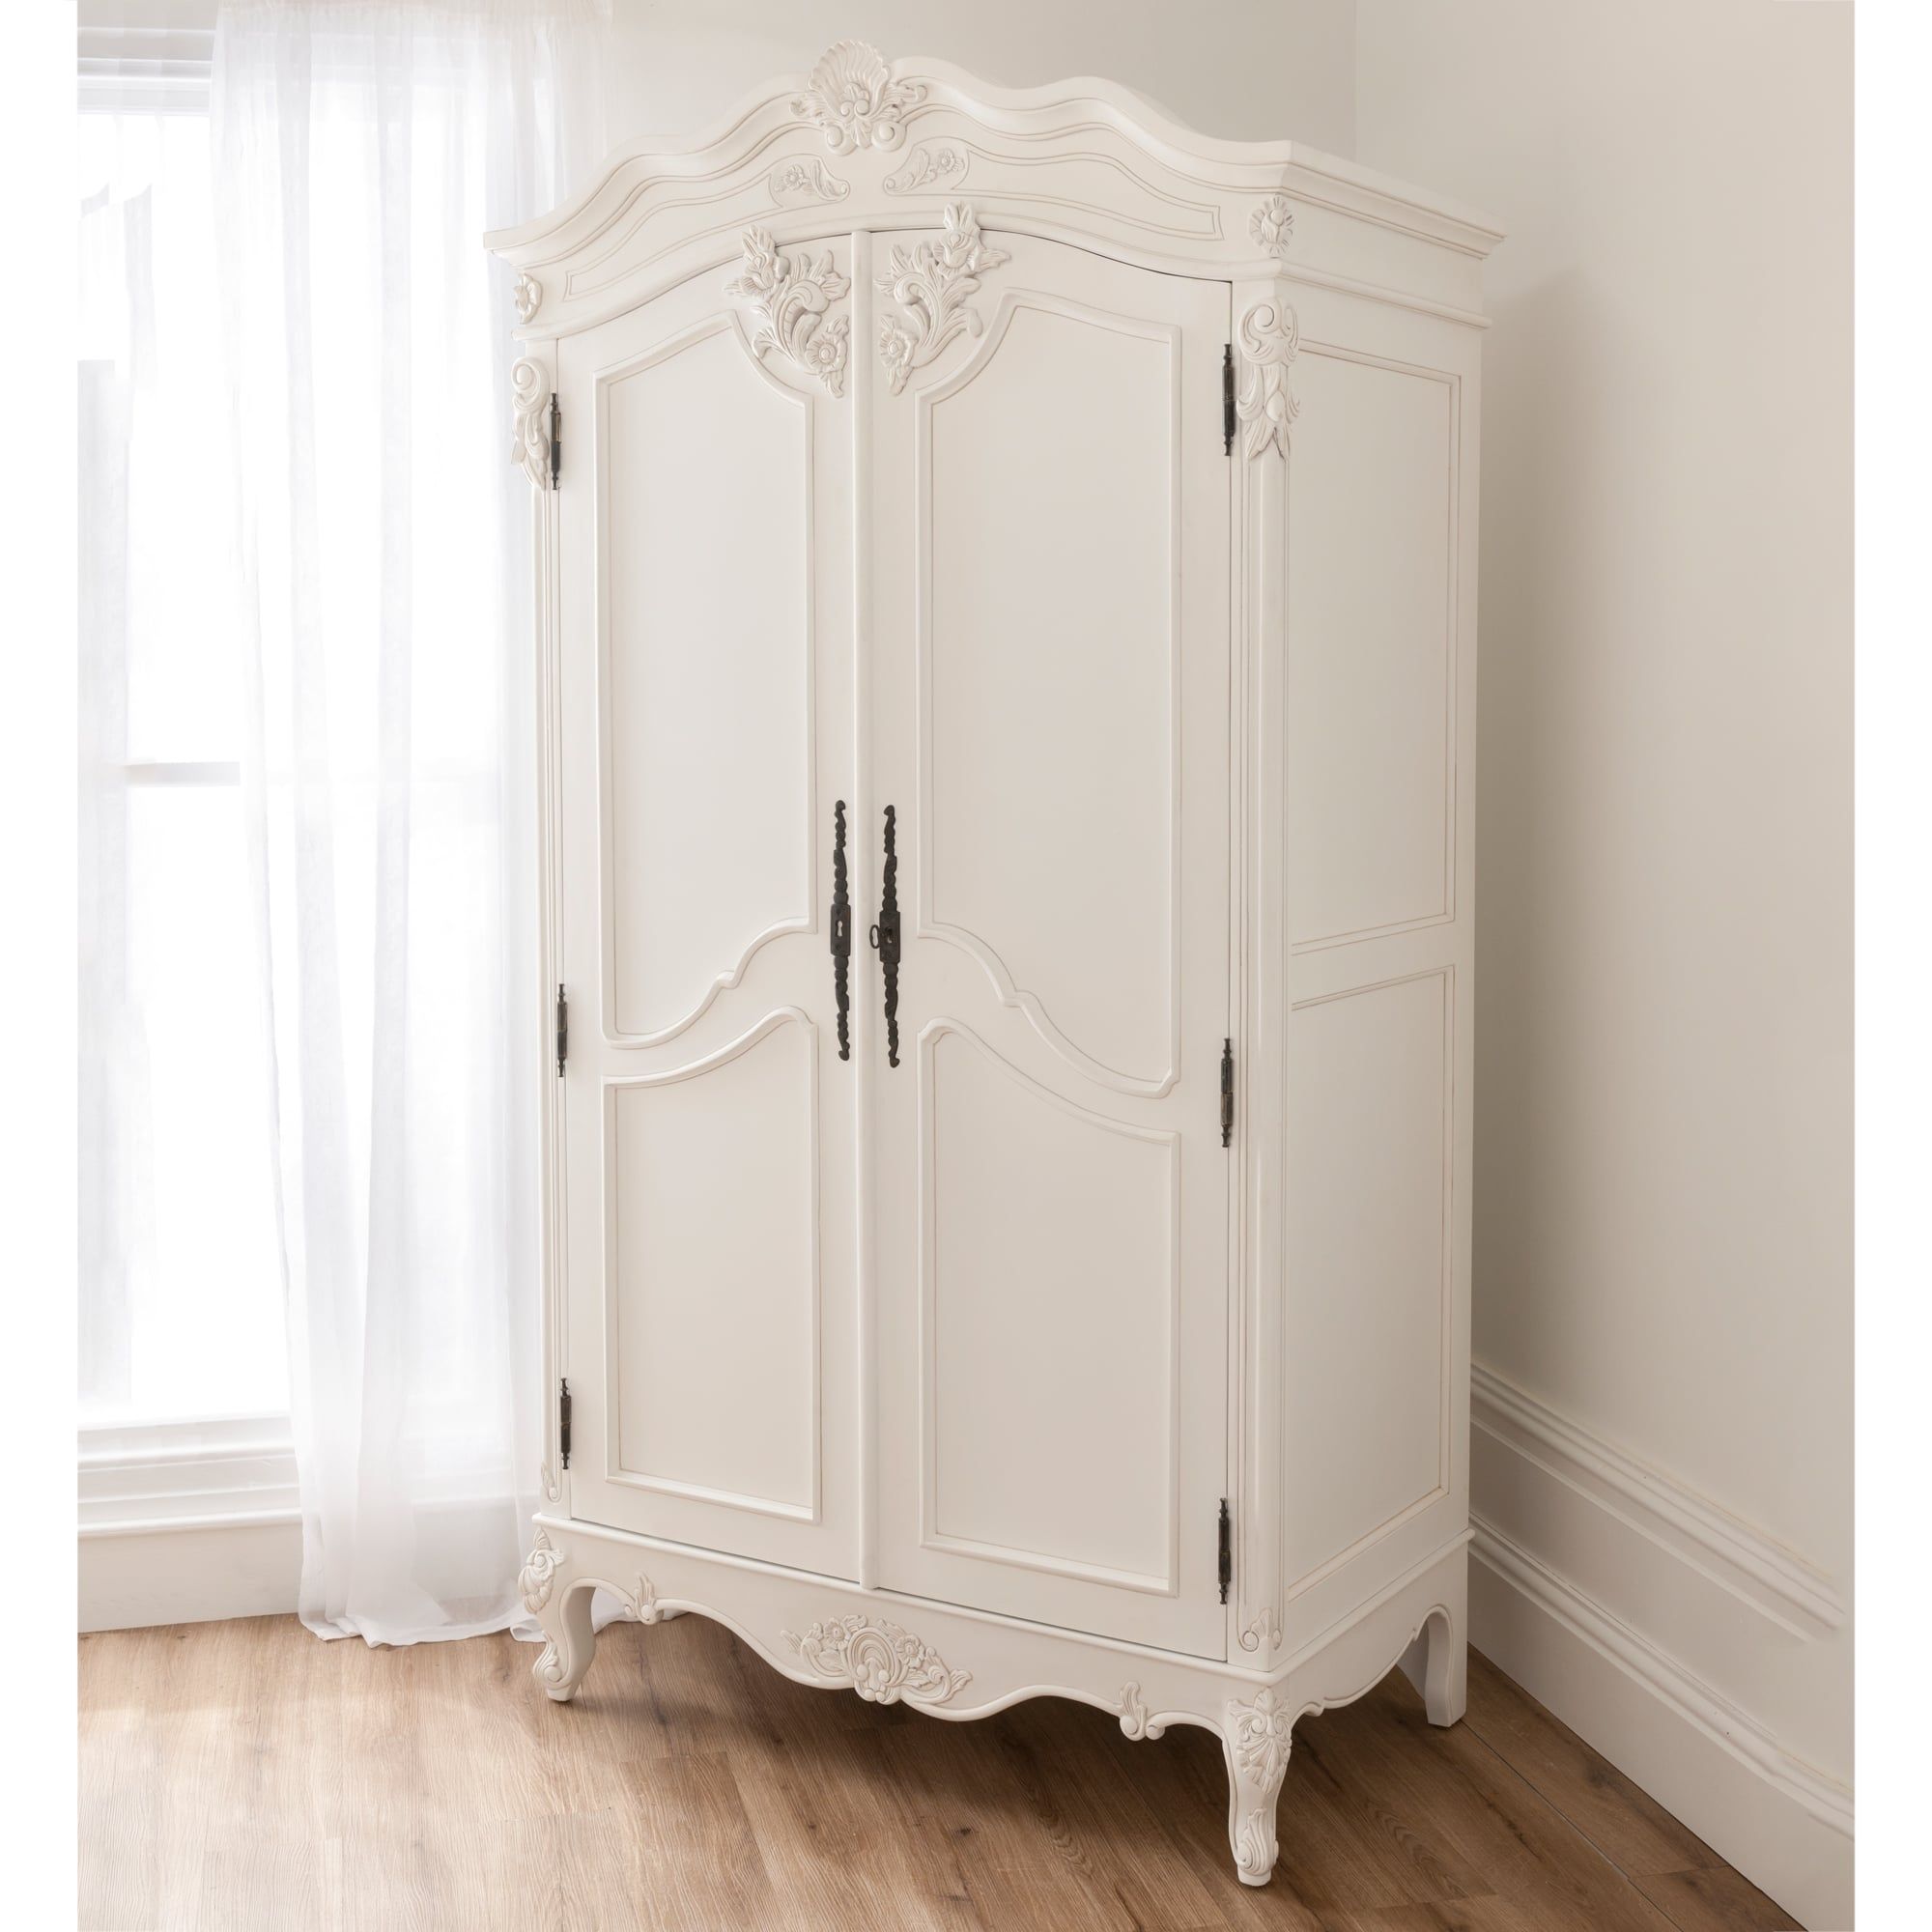 Baroque Antique French Wardrobe Is Available Online At Homesdirect365 Intended For French Style Wardrobes (Photo 9 of 15)